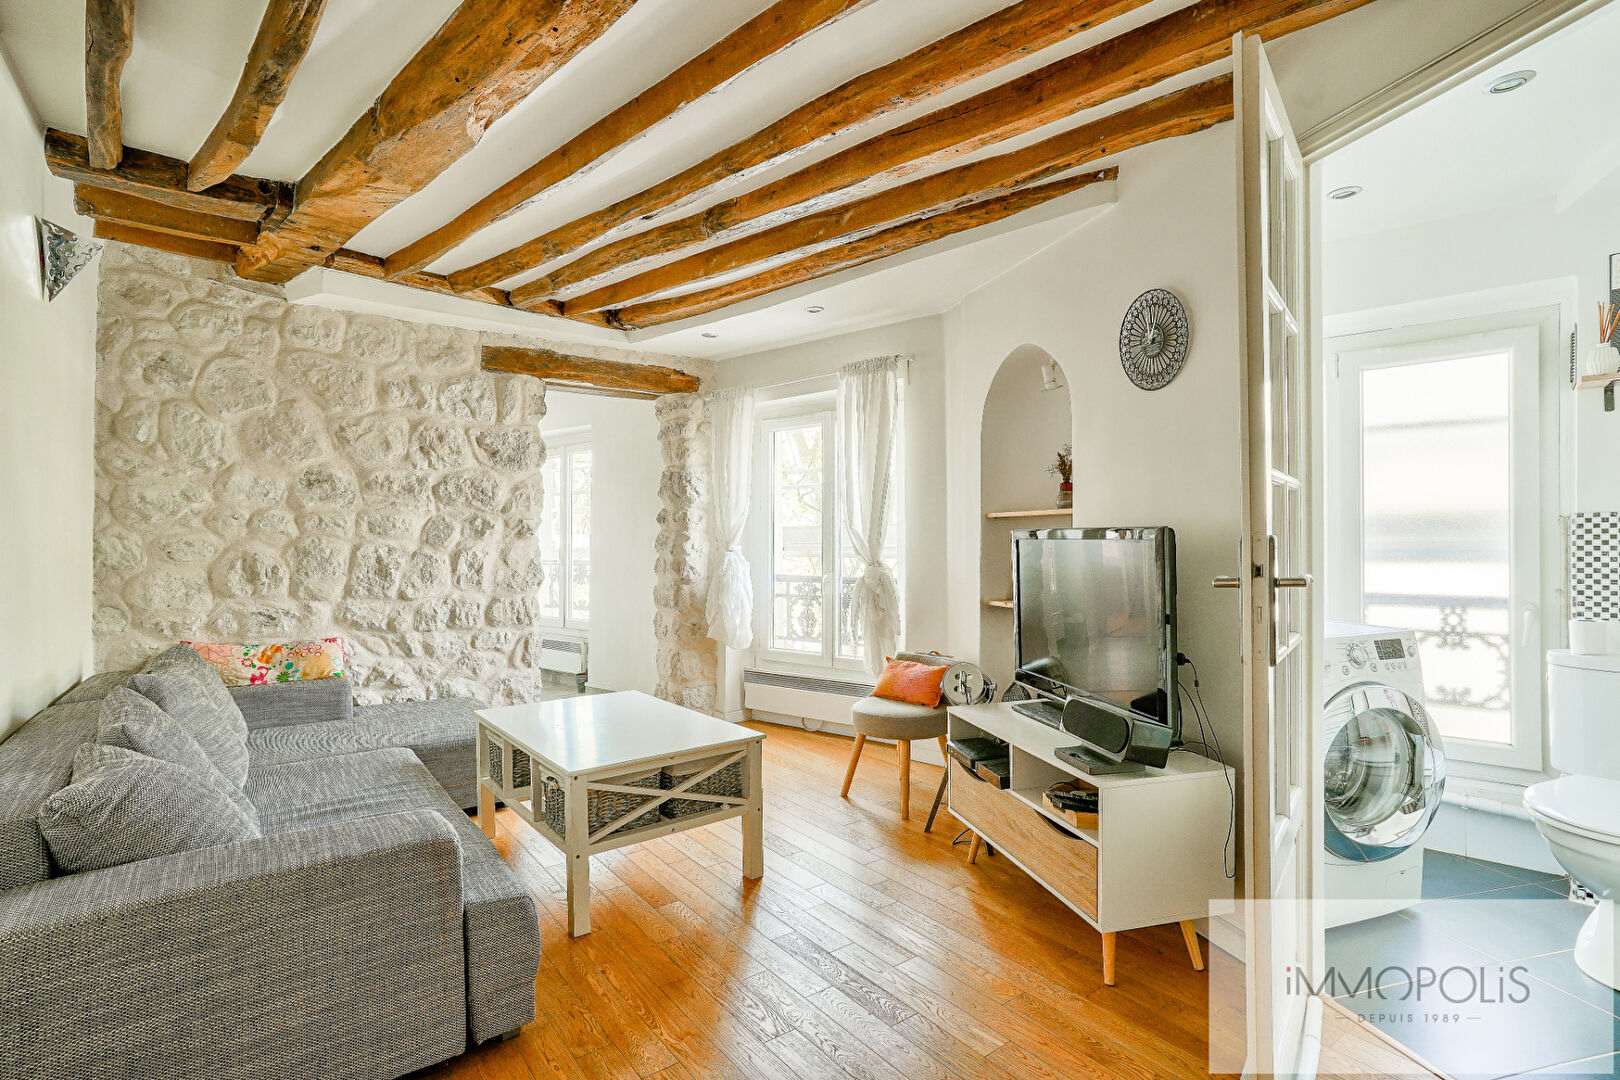 Apartment two rooms of 35m² full of charm 4